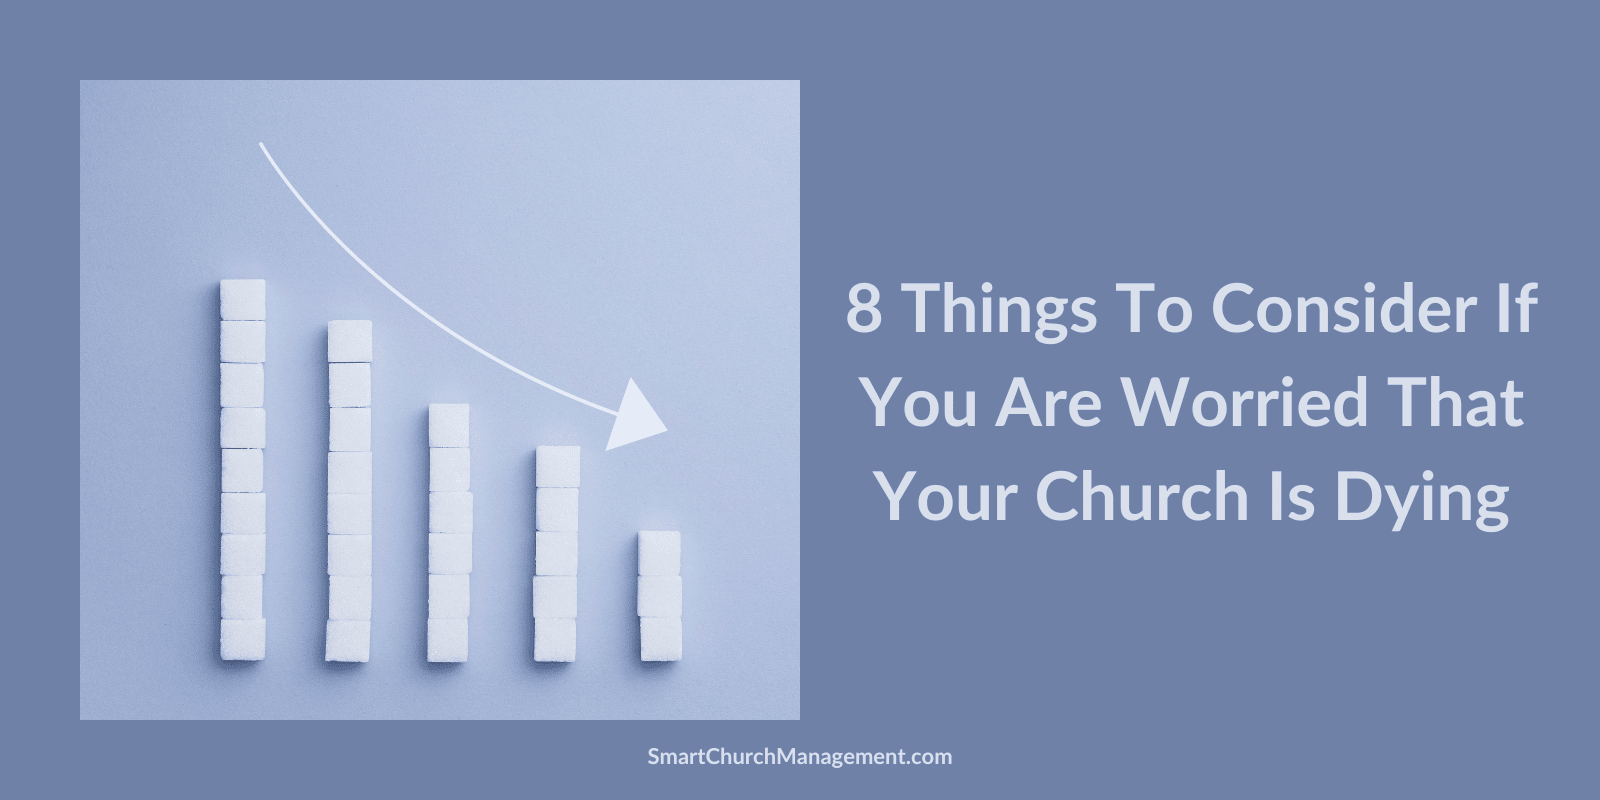 Are you worried that your church is dying?